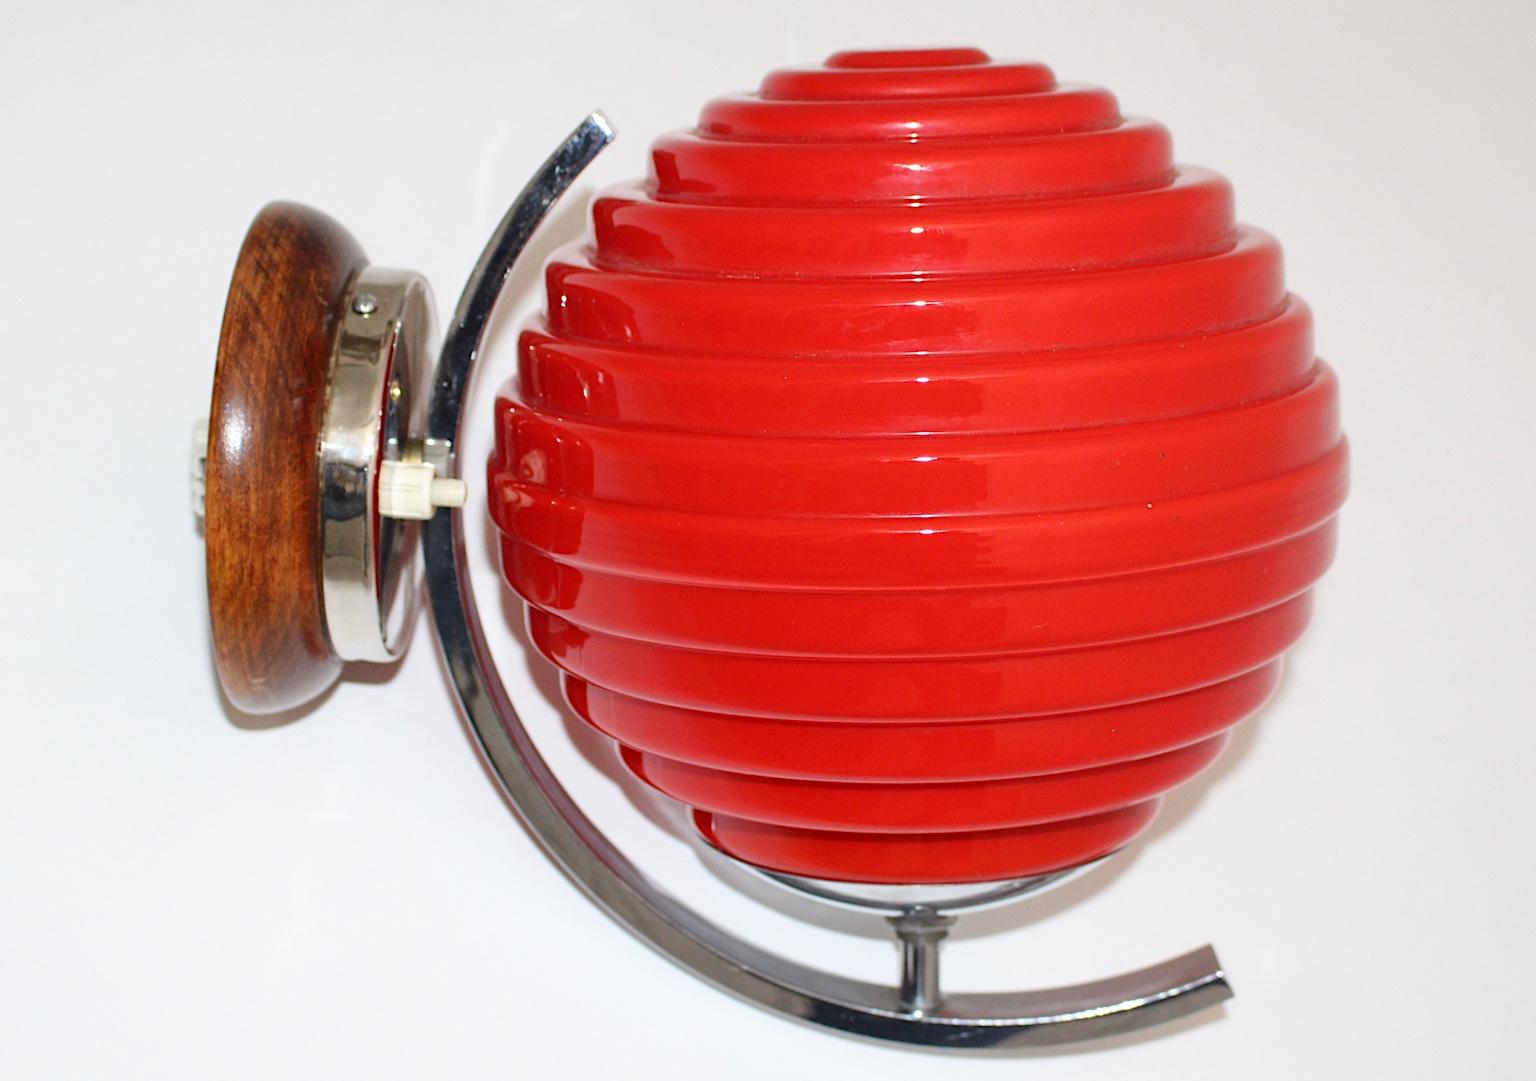 Art Deco vintage sconce or wall lighting from chromed metal and red glass shade Austria 1920s.
A gorgeous sconce or wall light Japanese lantern - like with a chromed metal fitting and a geometric shape bold red glass shade. The lamp shade shows